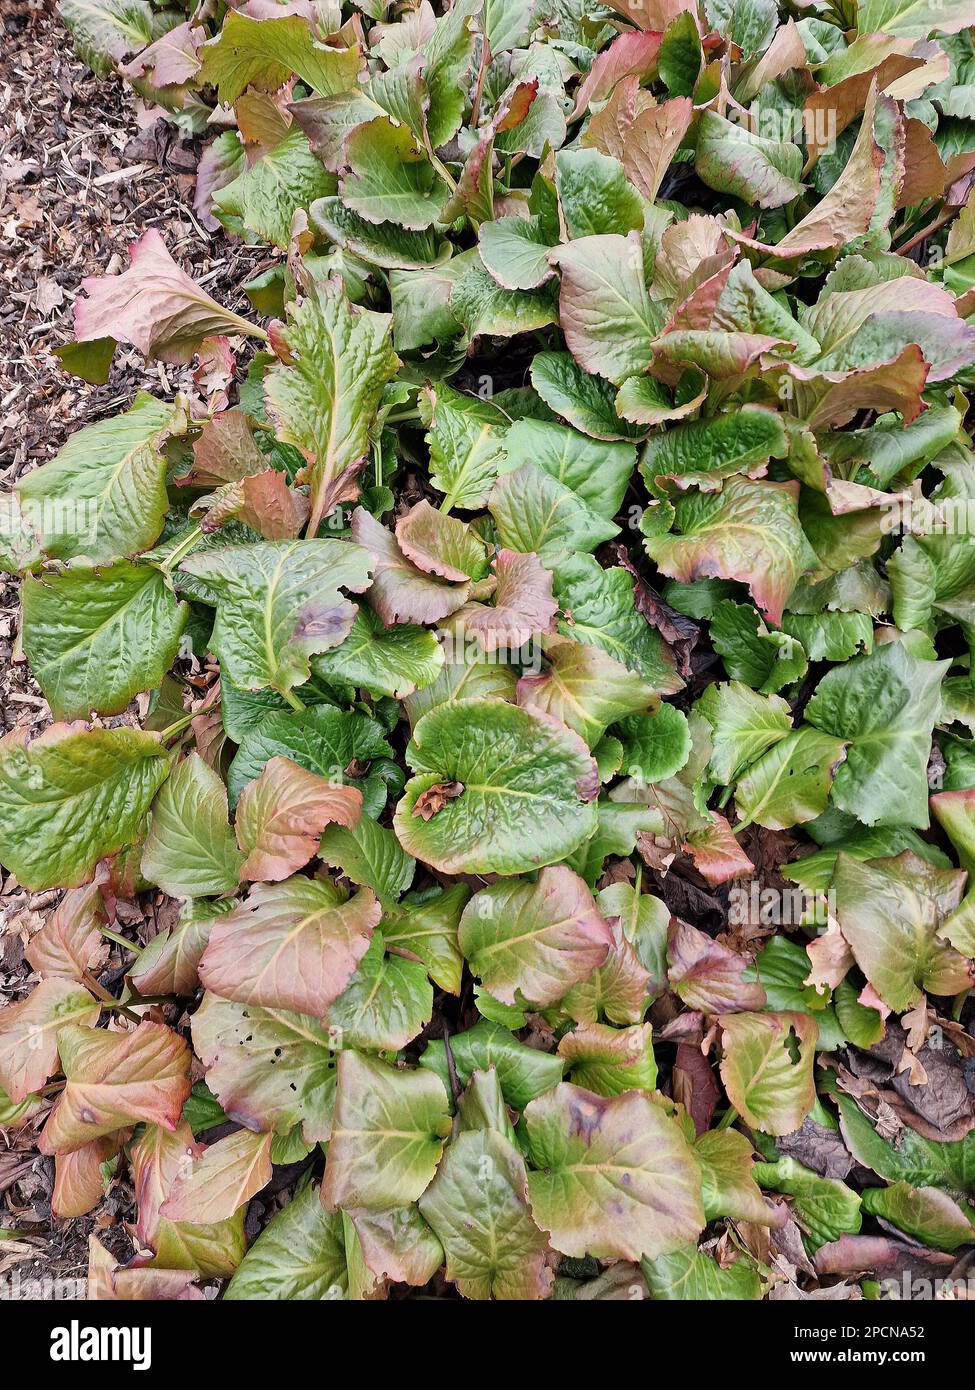 Closeup and overhead shot of the evergreen garden perennial with large reddish leaves Bergenia morgenrote. Stock Photo